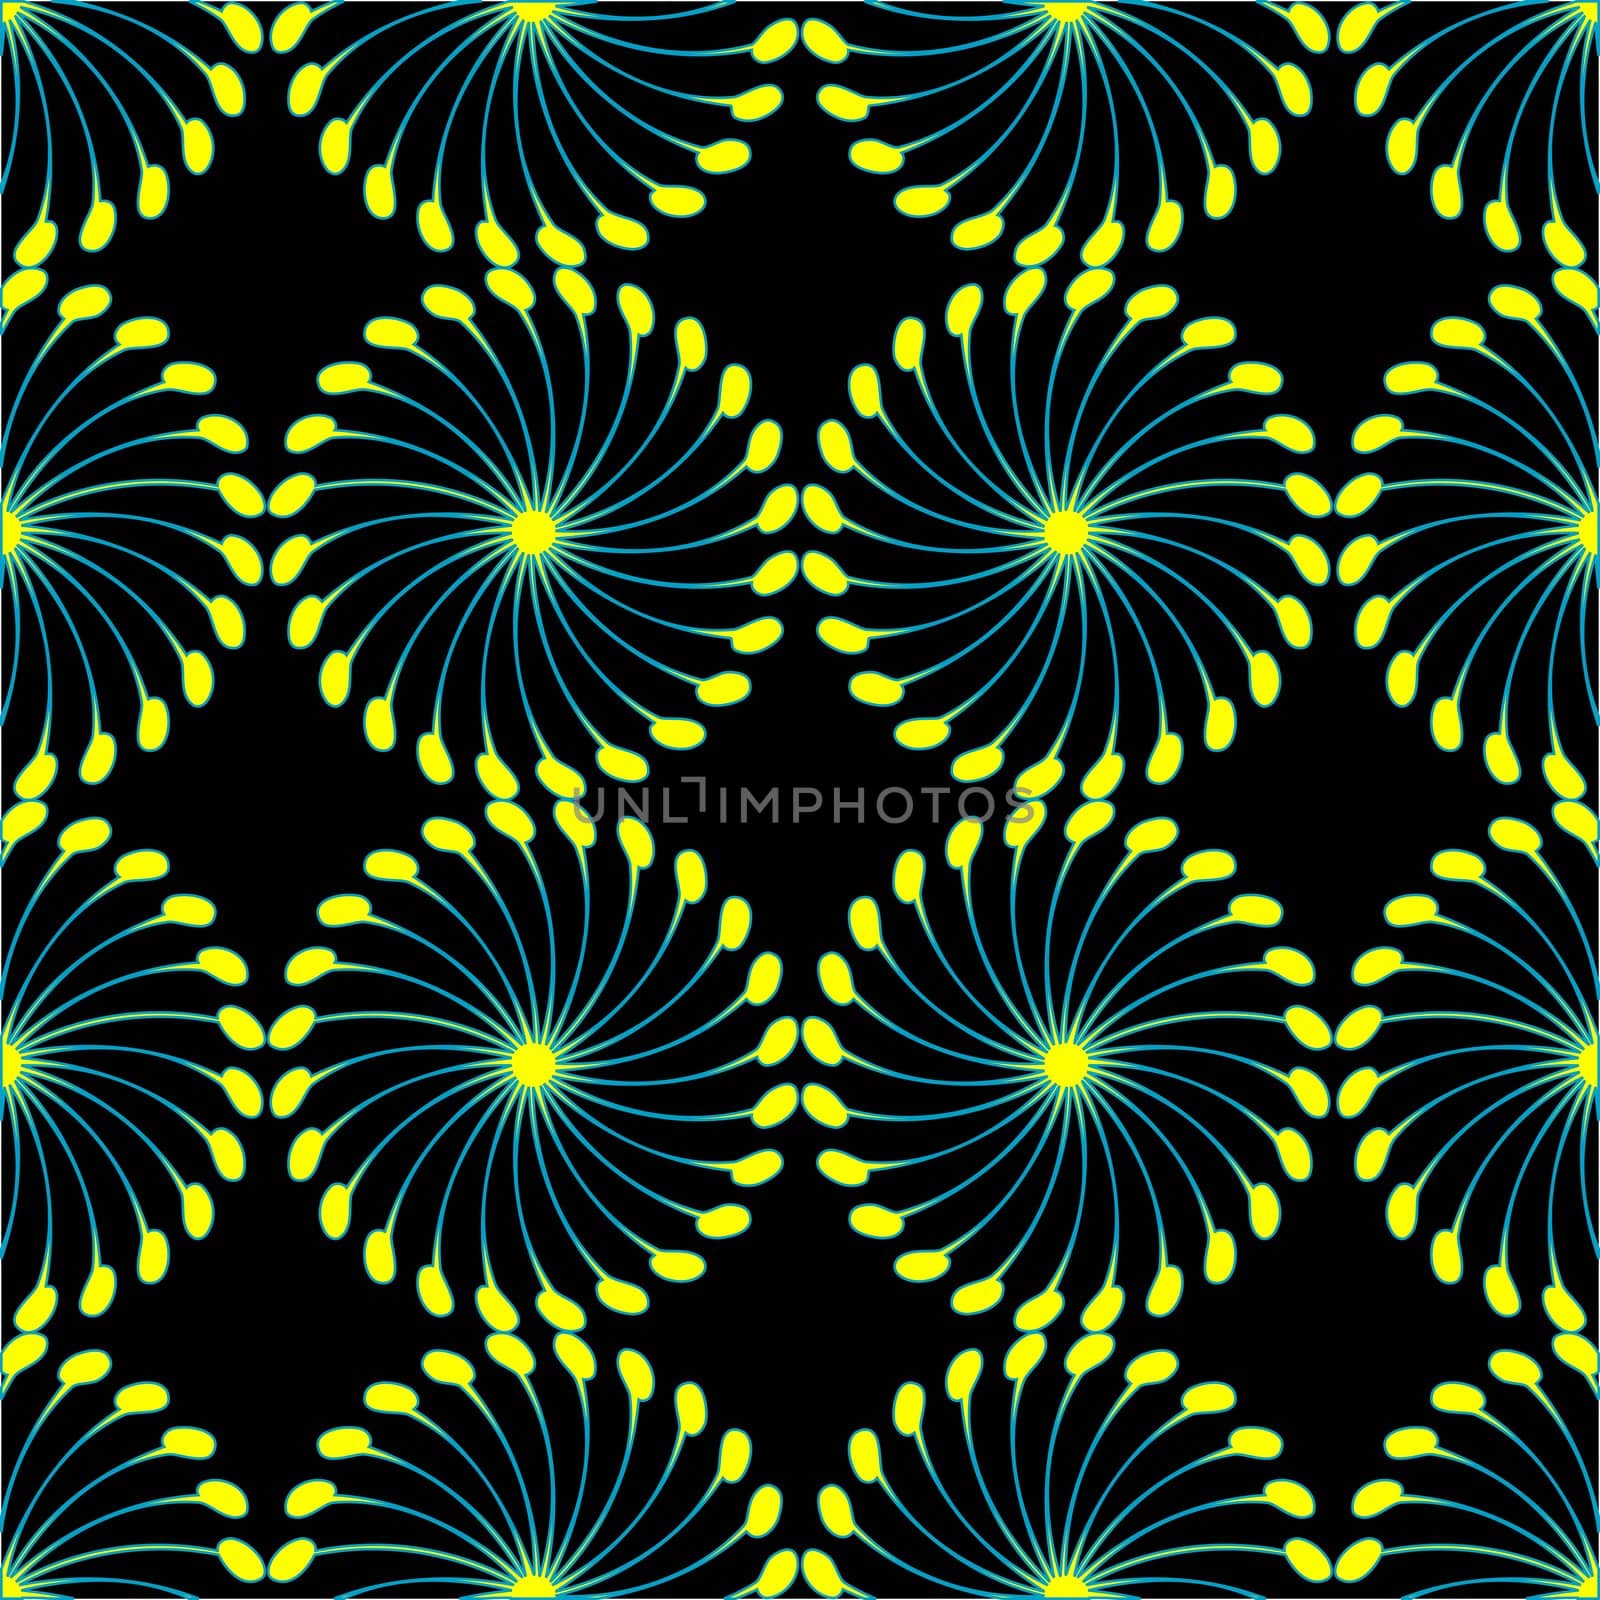 paper wind mill pattern black and yellow by robertosch